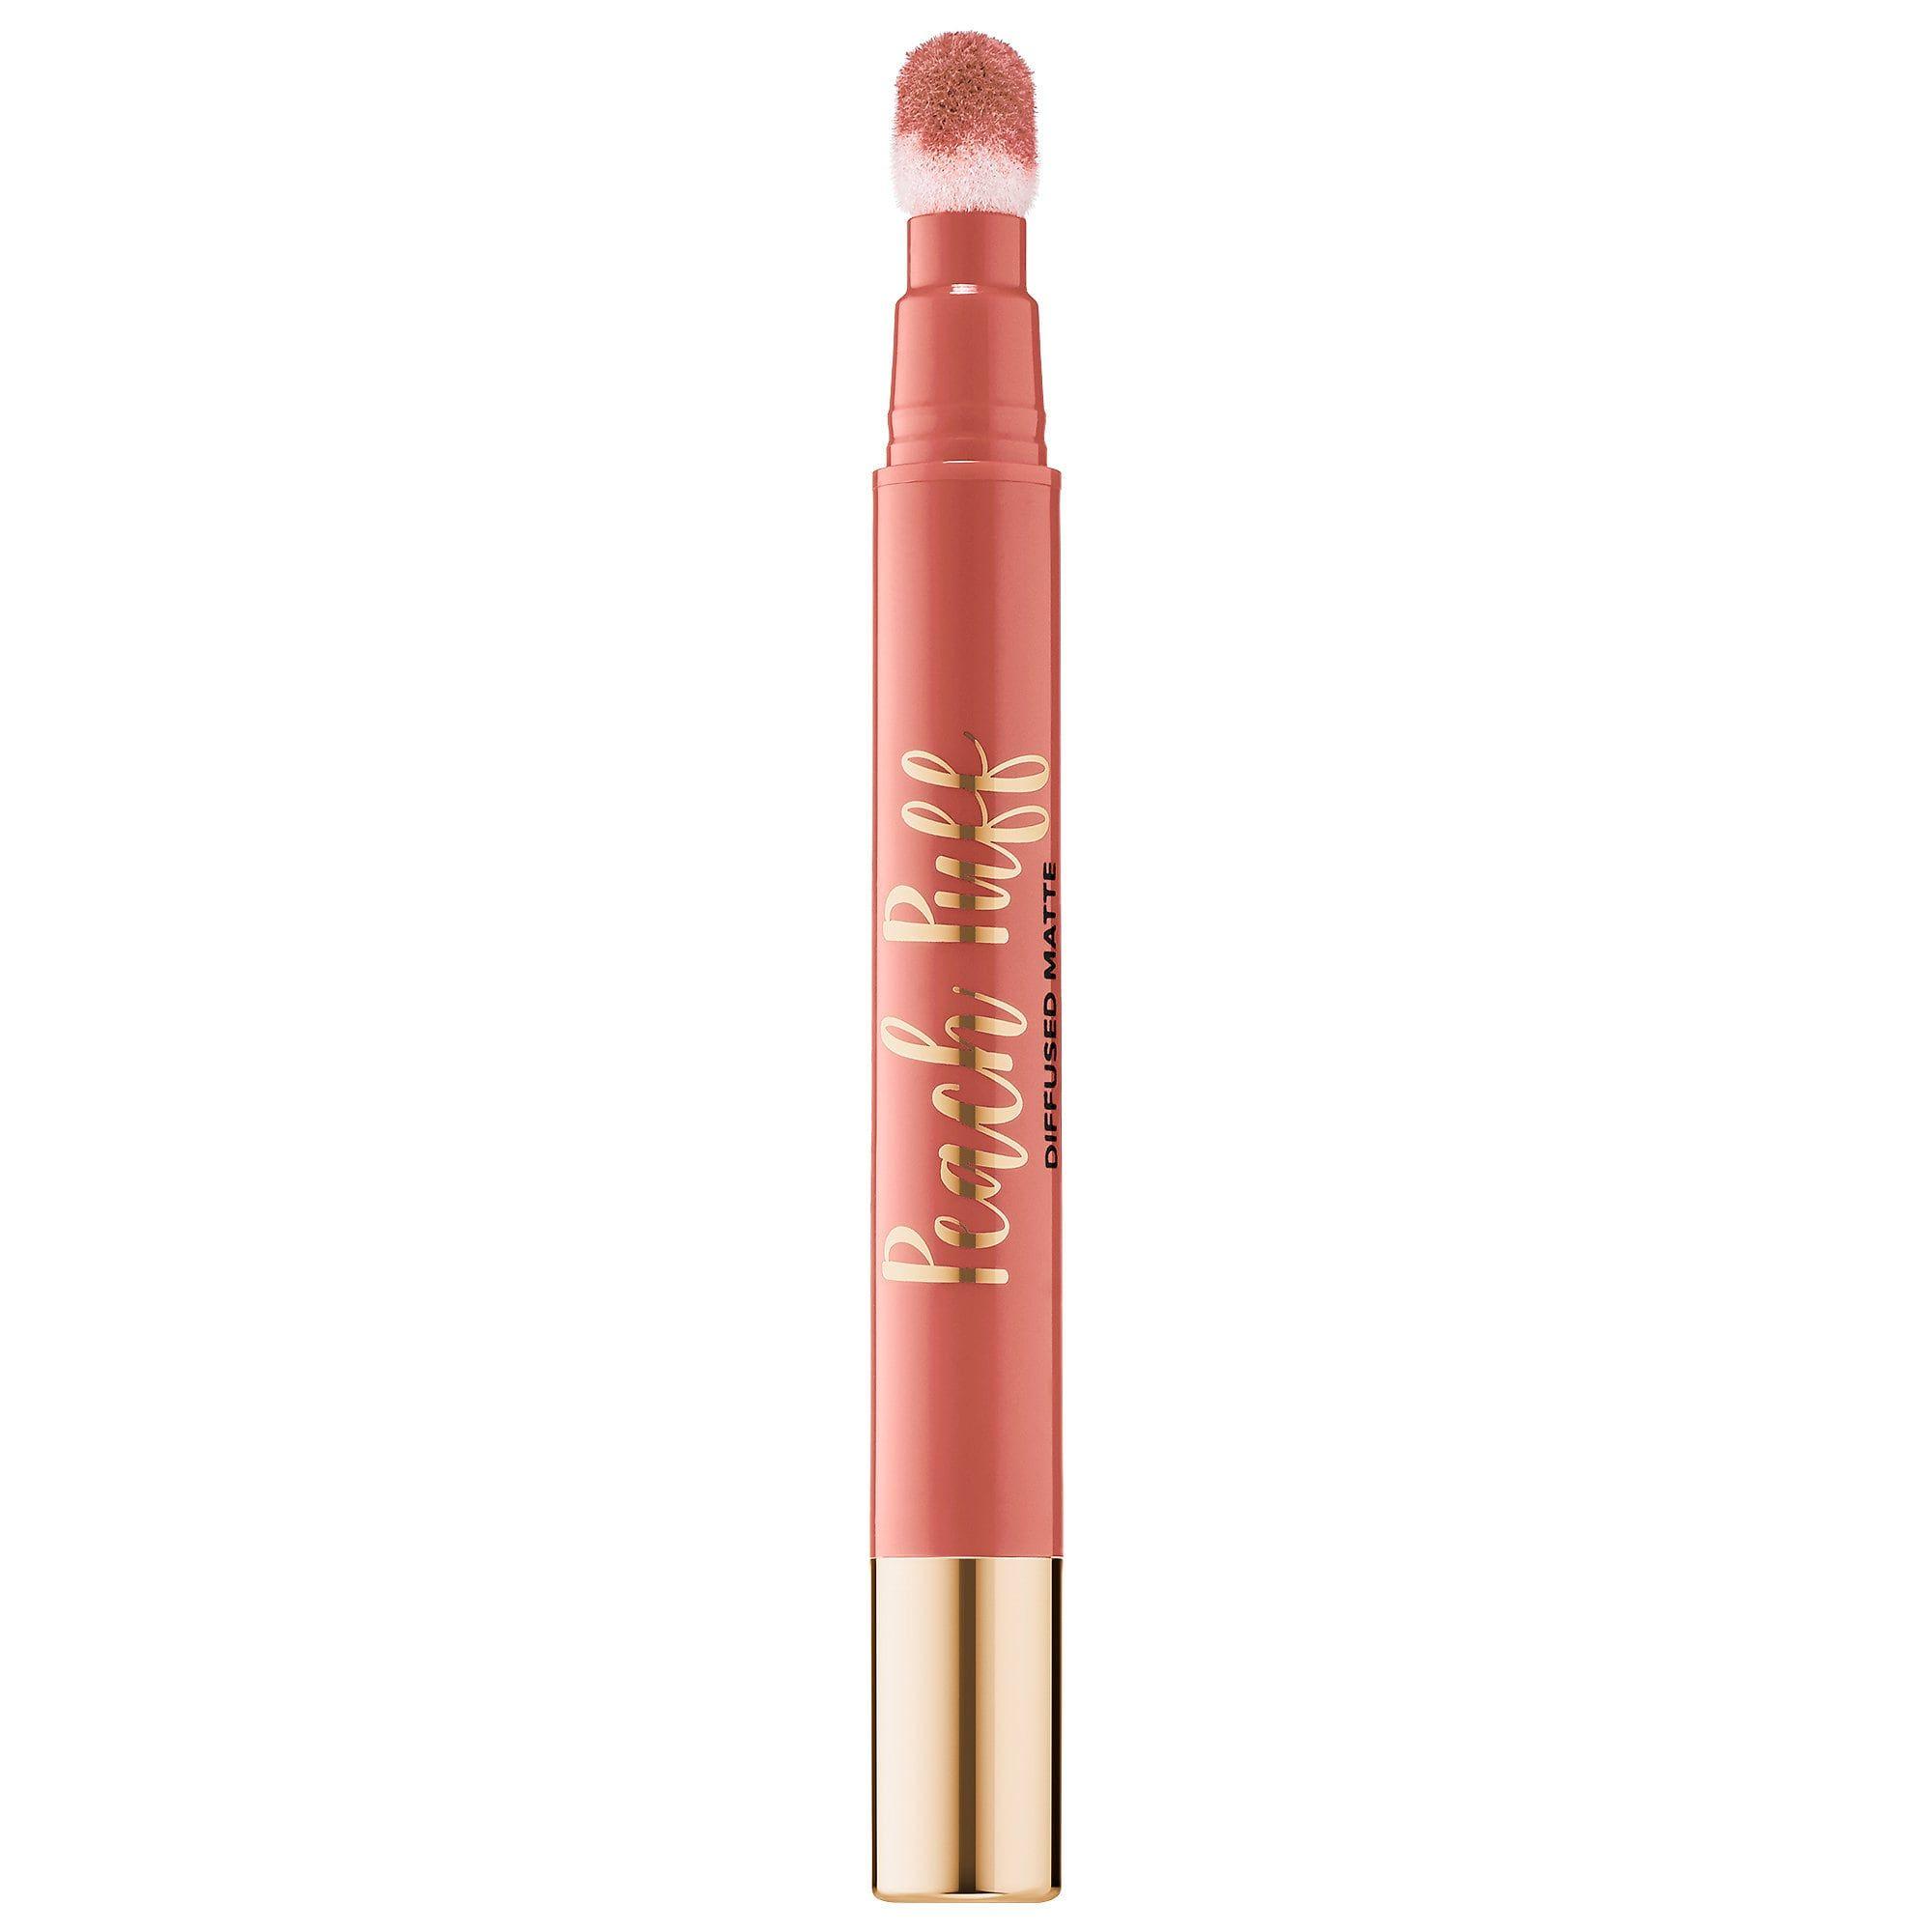 Too Faced Peach Puff Lip Color You Wish 